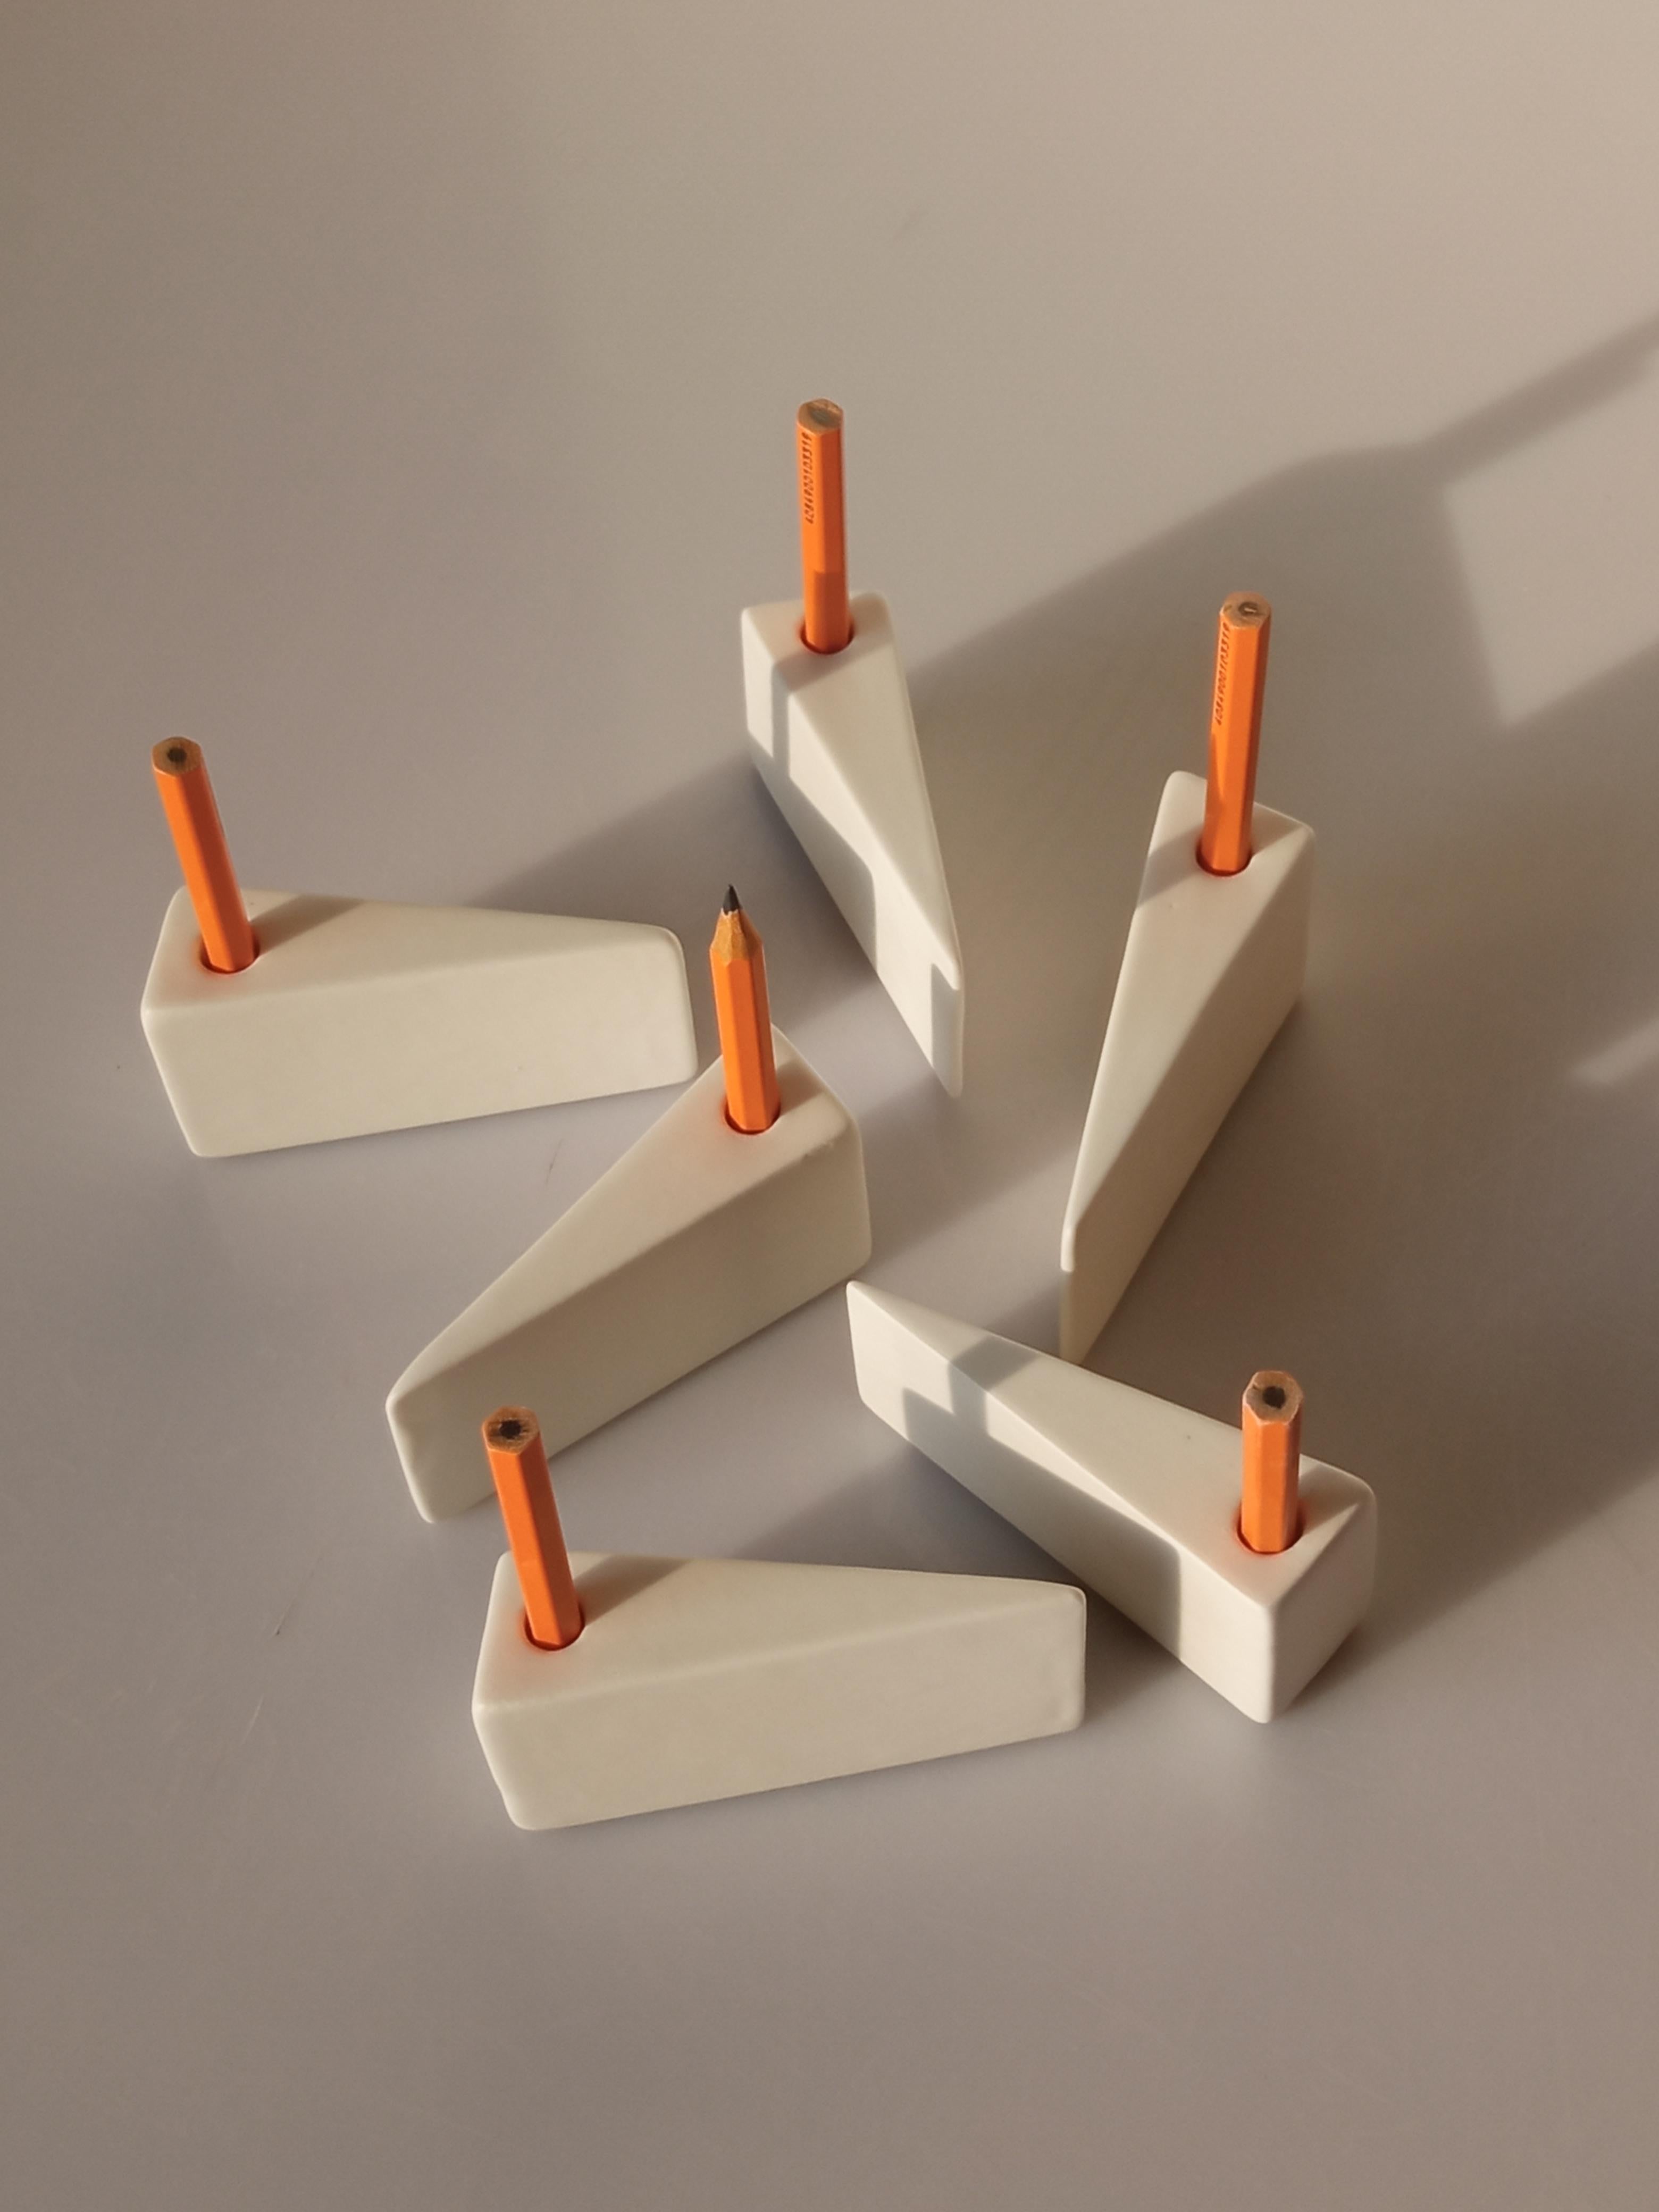 Lella is a ceramic pencil holder, design by ivdesign in febrary 2022
From the wedge shape, a simple, precise and minimal geometry, an everyday object such as a pencil case is born. It is proposed in white glazed terracotta, with a matte